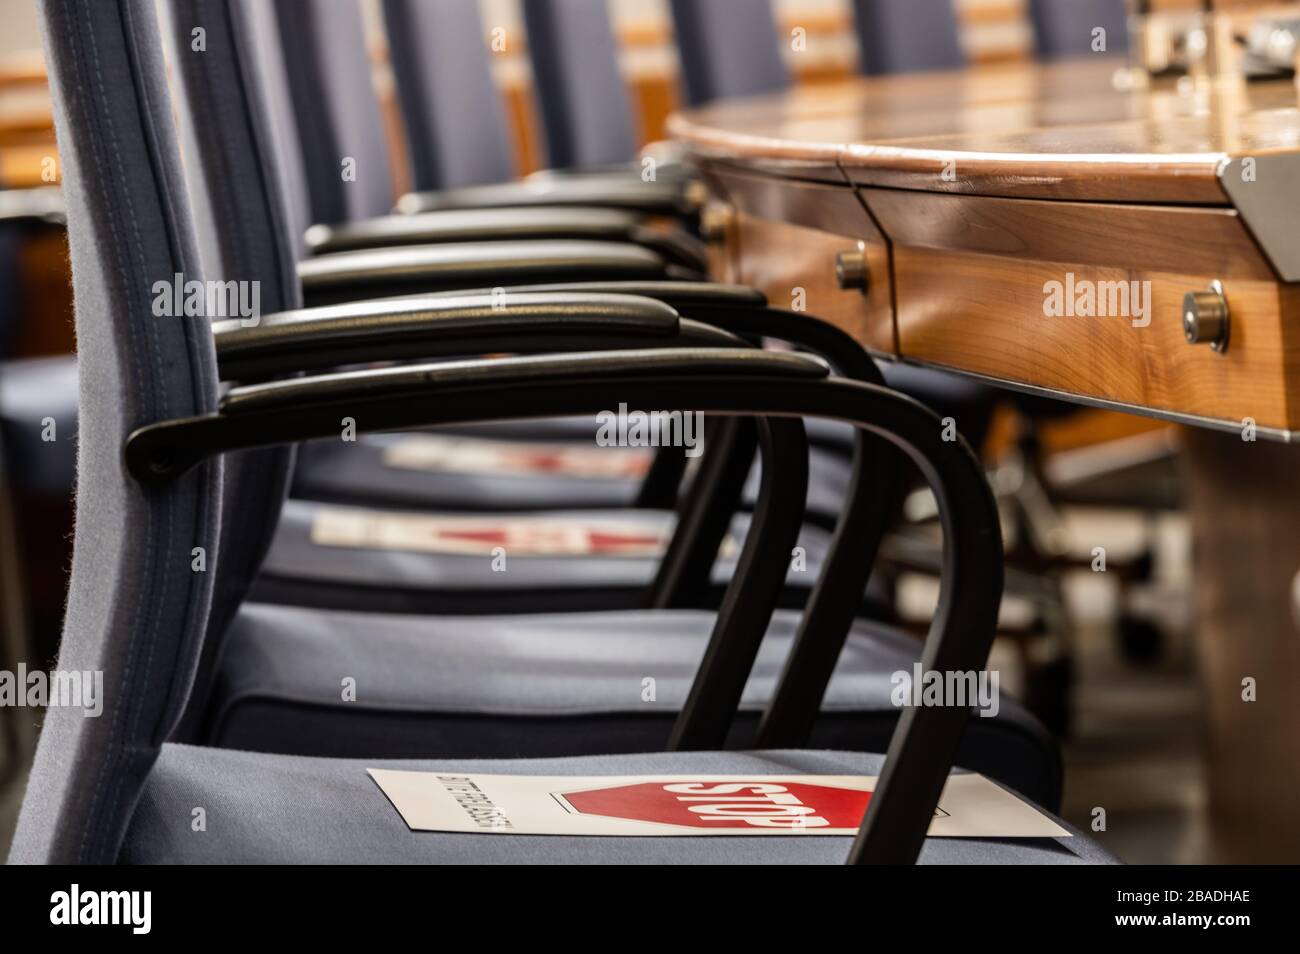 27 March 2020, Rhineland-Palatinate, Mainz: On the chairs of some of the members of parliament there are notices 'Stop Please Release'. Despite the corona crisis, a special session is held in the Rhineland-Palatinate state parliament. Among other things, a supplementary budget due to additional expenditures in the health care system and additional guarantees for state loans to companies are on the agenda. Some of the members of parliament are sitting on the gallery because of the distance regulation, so the quorum and the representation of the majority is ensured. Photo: Andreas Arnold/dpa Stock Photo